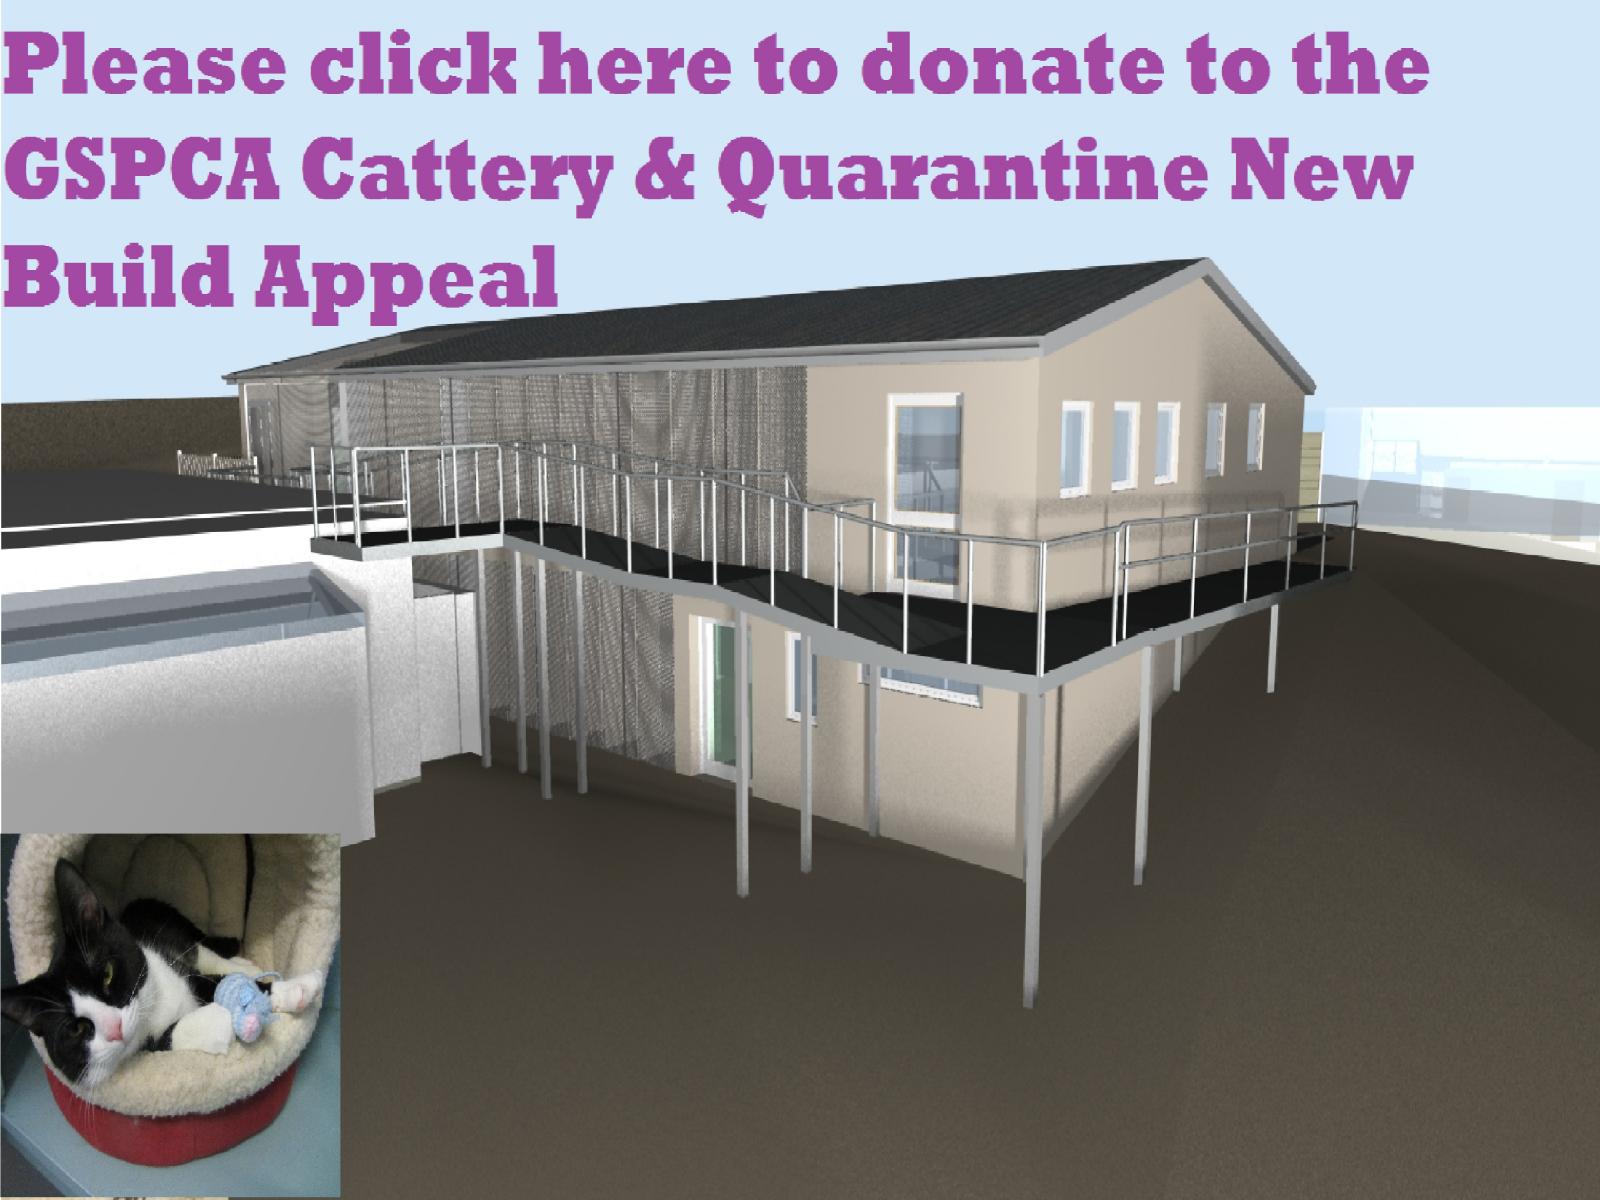 To help donate to our Cattery & Quarantine Appeal please click here